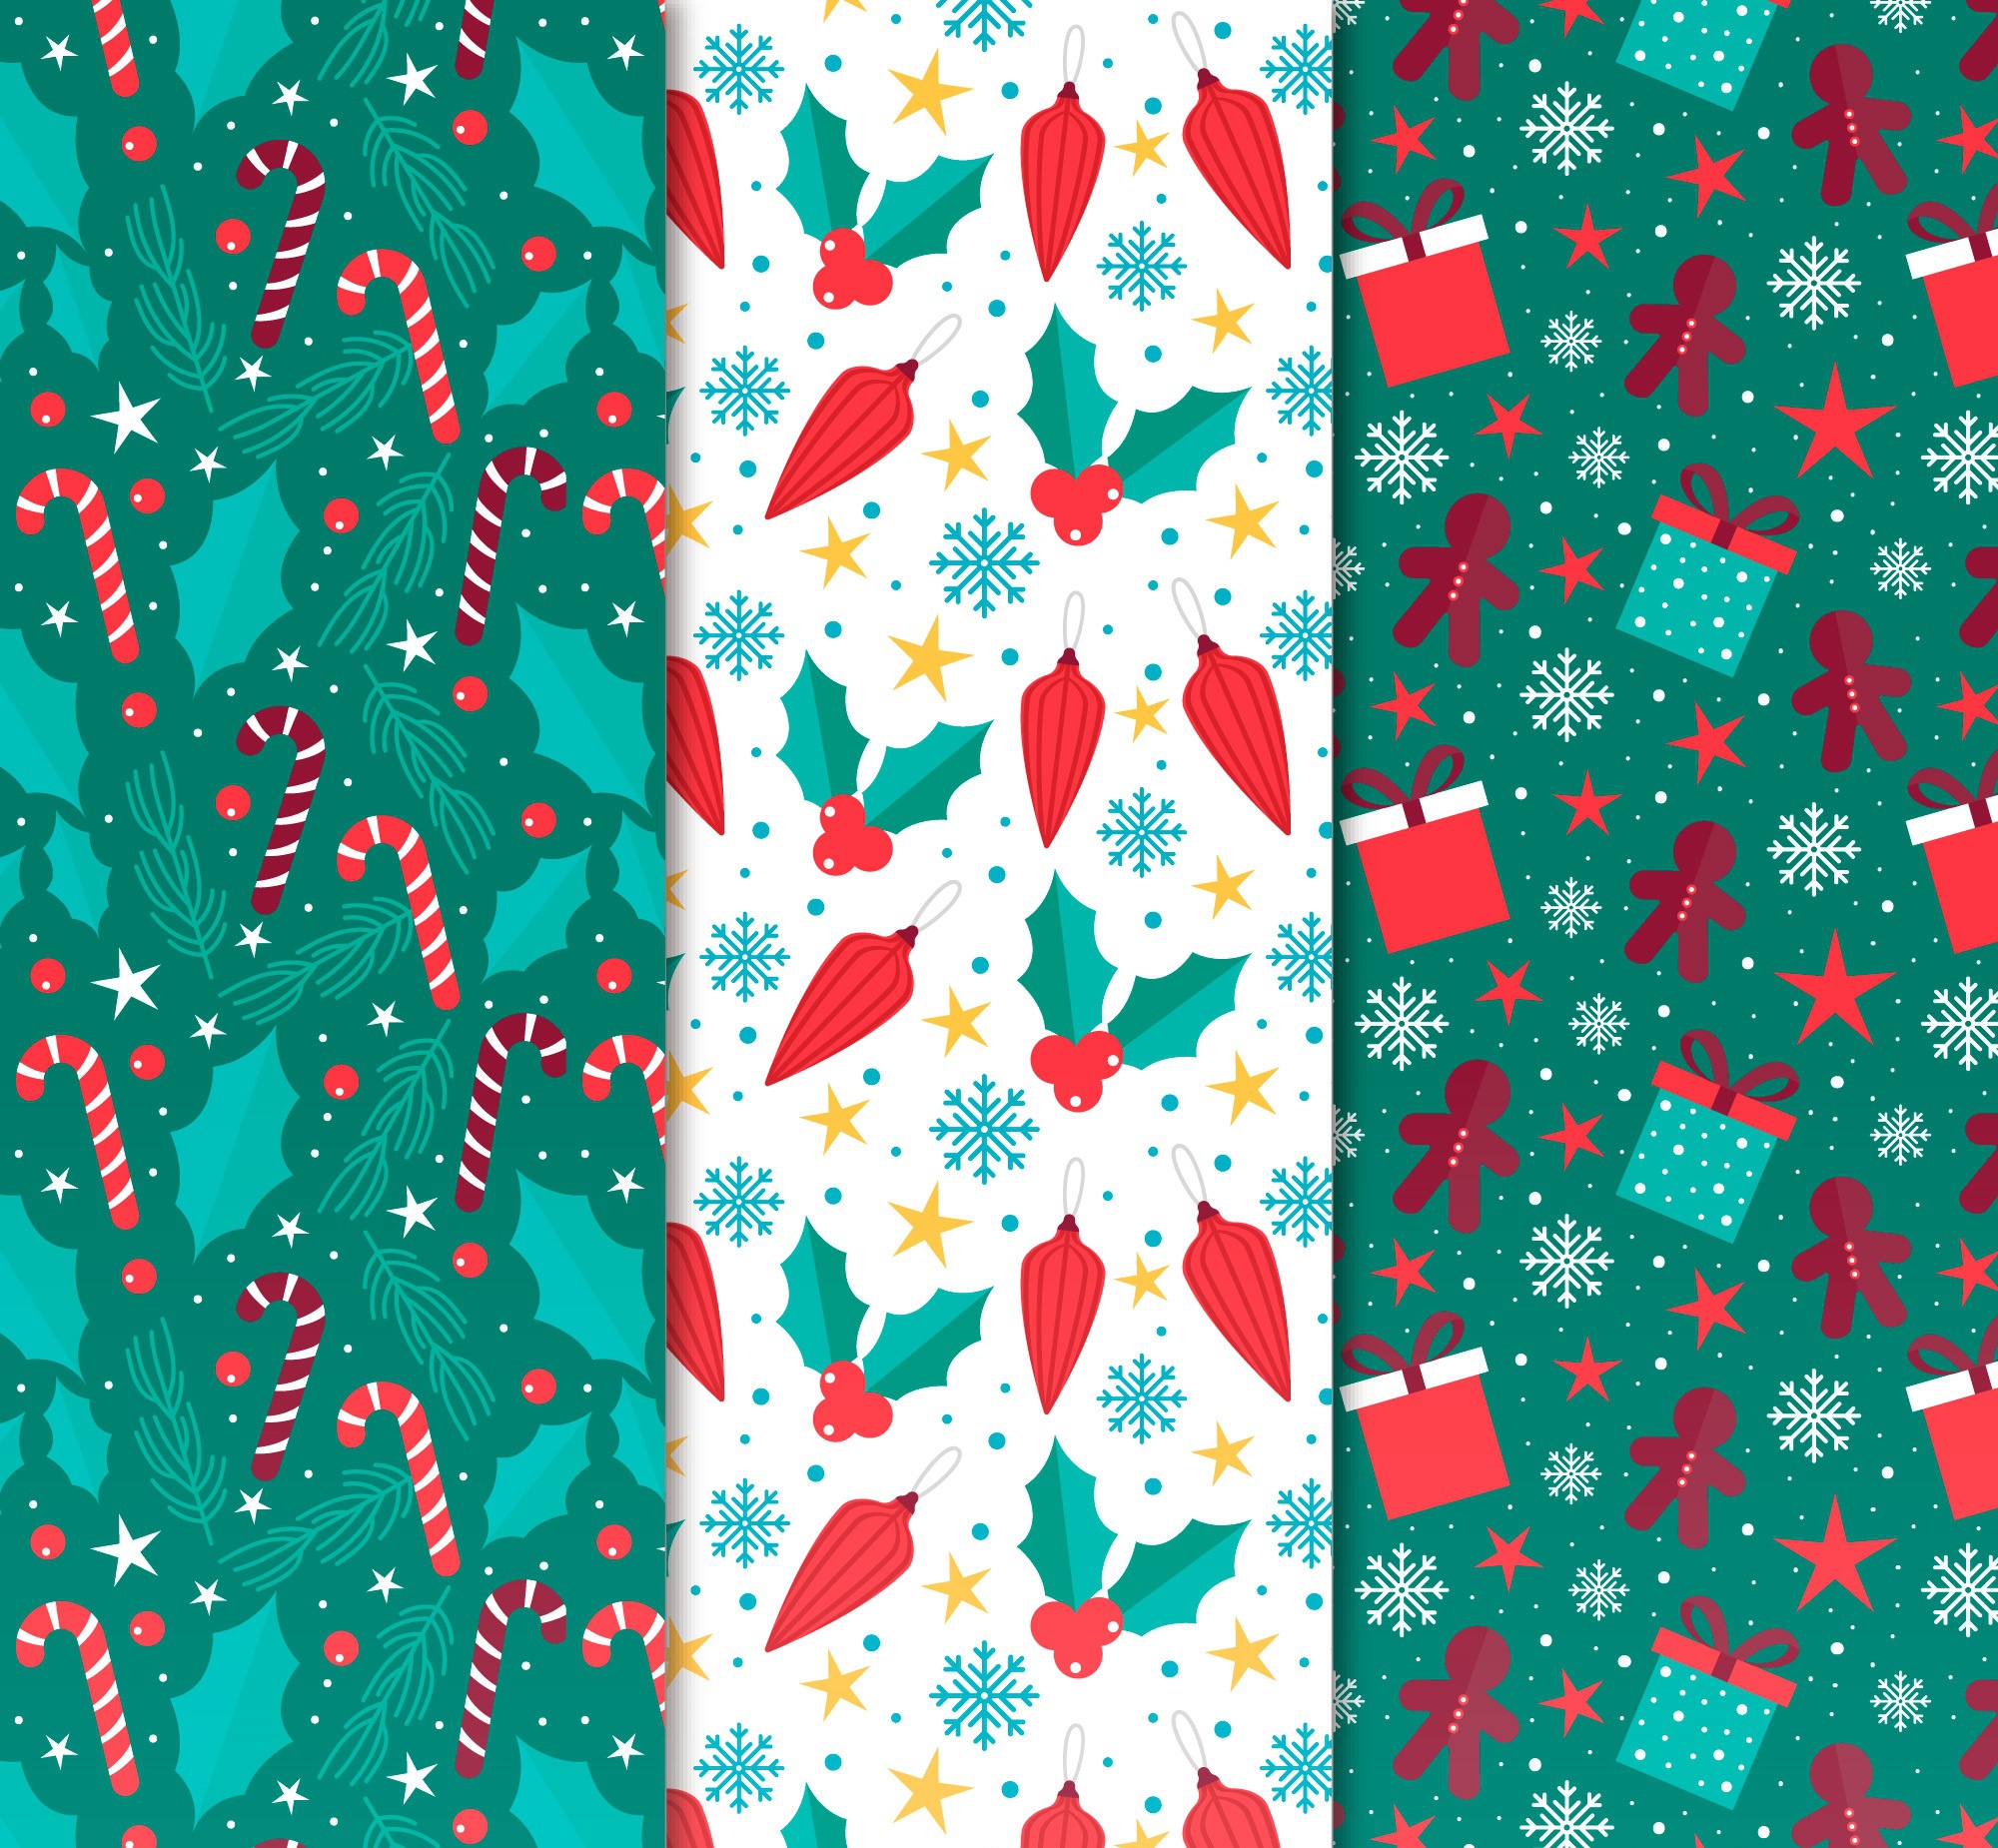 General 2000x1850 Christmas texture pattern